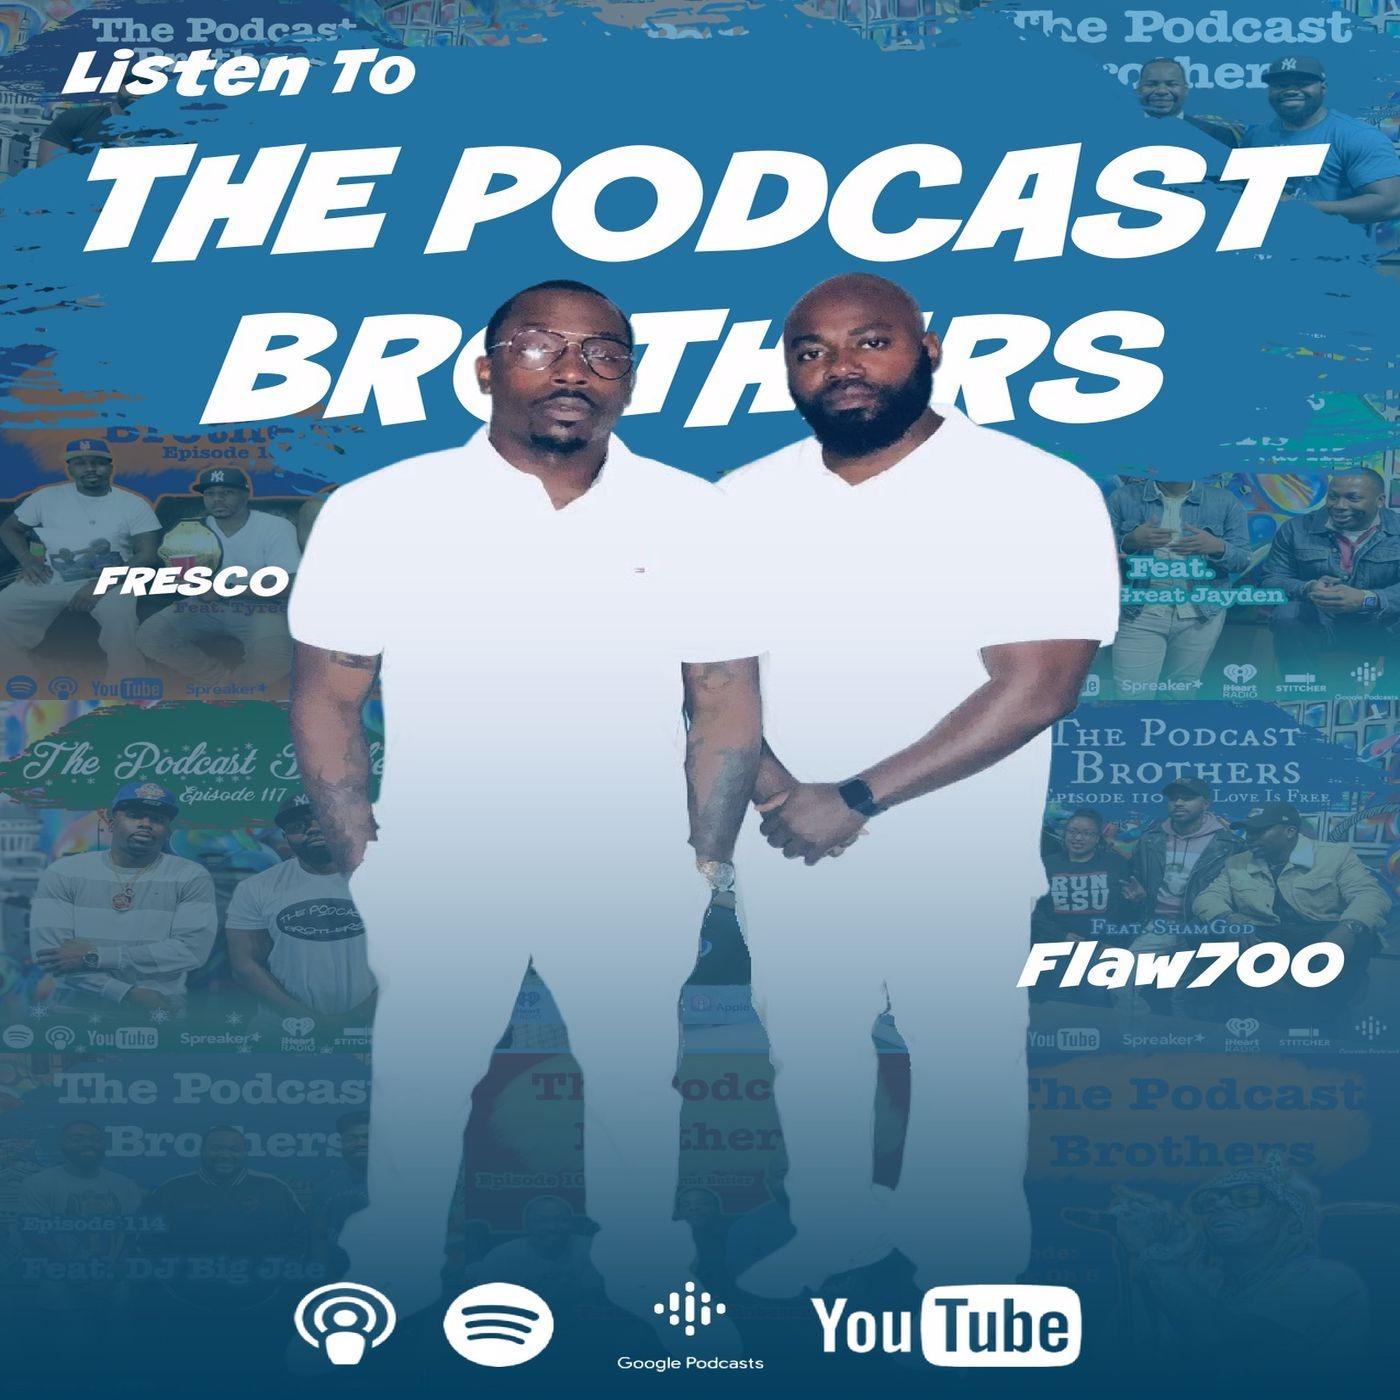 The Podcast Brothers